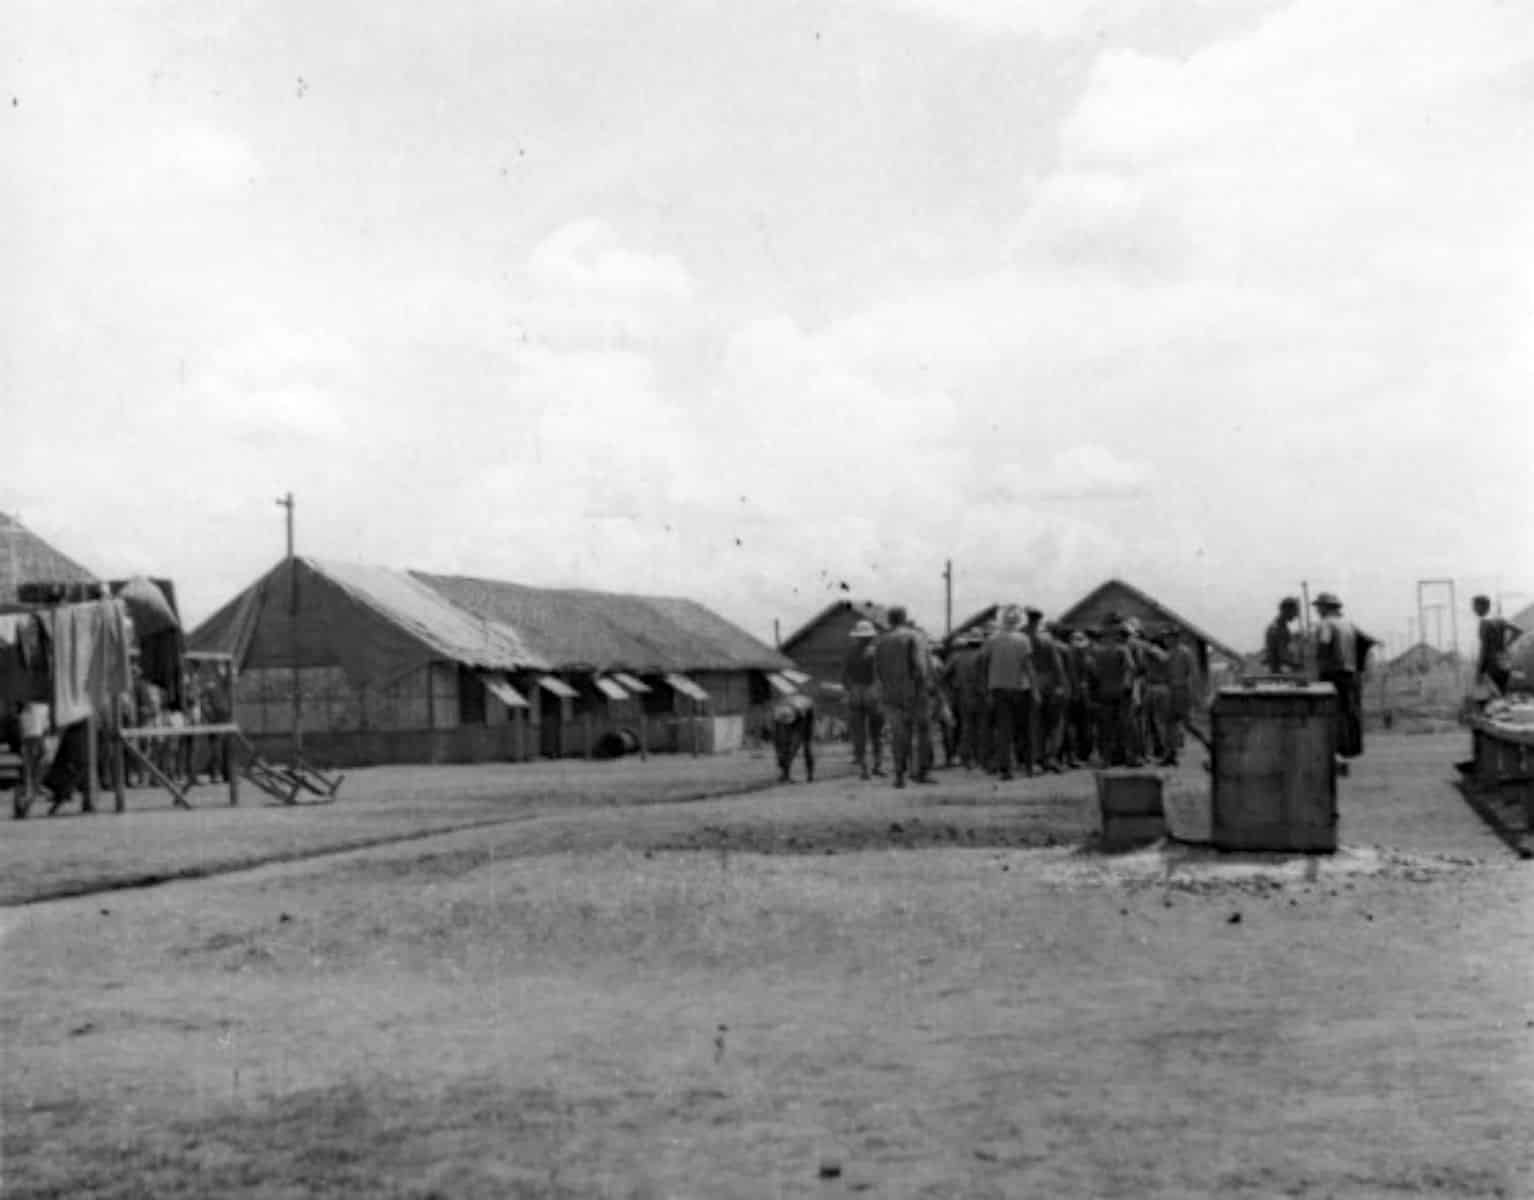 A rare photograph of Allied POWs marching in formation at Cabanatuan Prison in the early 1940s. Crotty was remembered by fellow prisoners for his sense of optimism despite his dire surroundings in the prison camp. Courtesy of the MacArthur Memorial Library, Norfolk, Virginia.